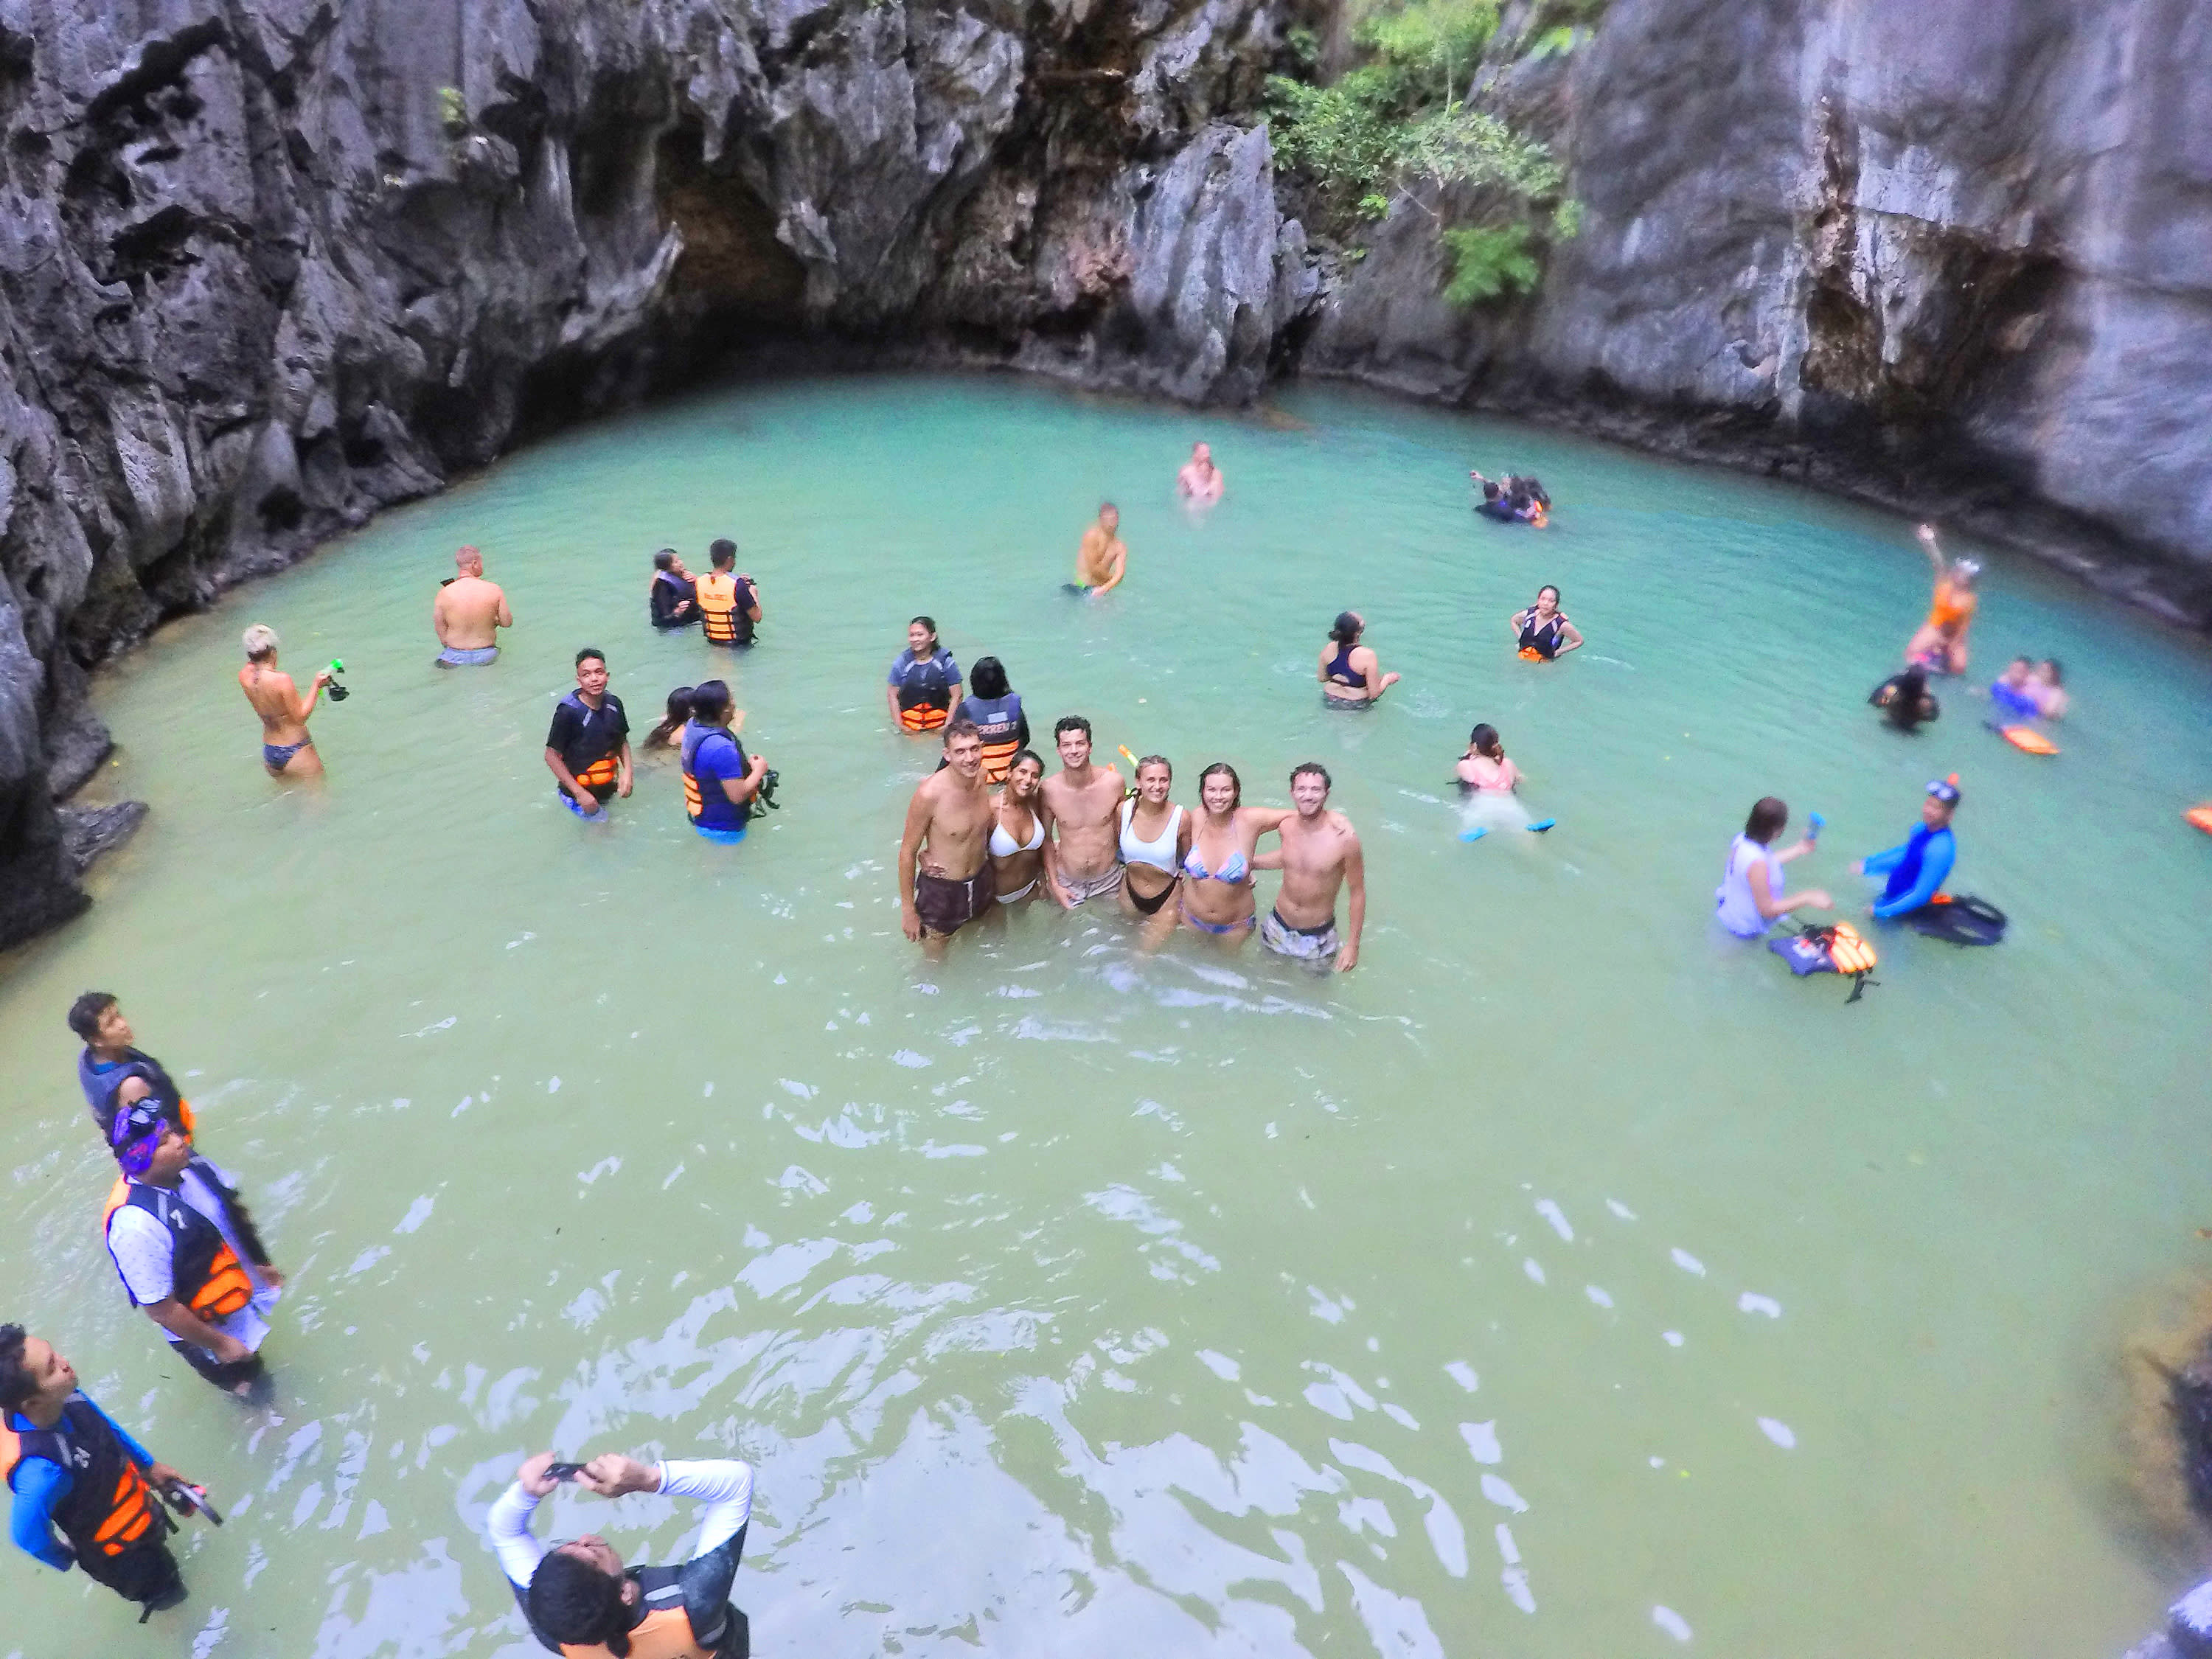 Our tour group and others in the not-so-secret lagoon of El Nido!